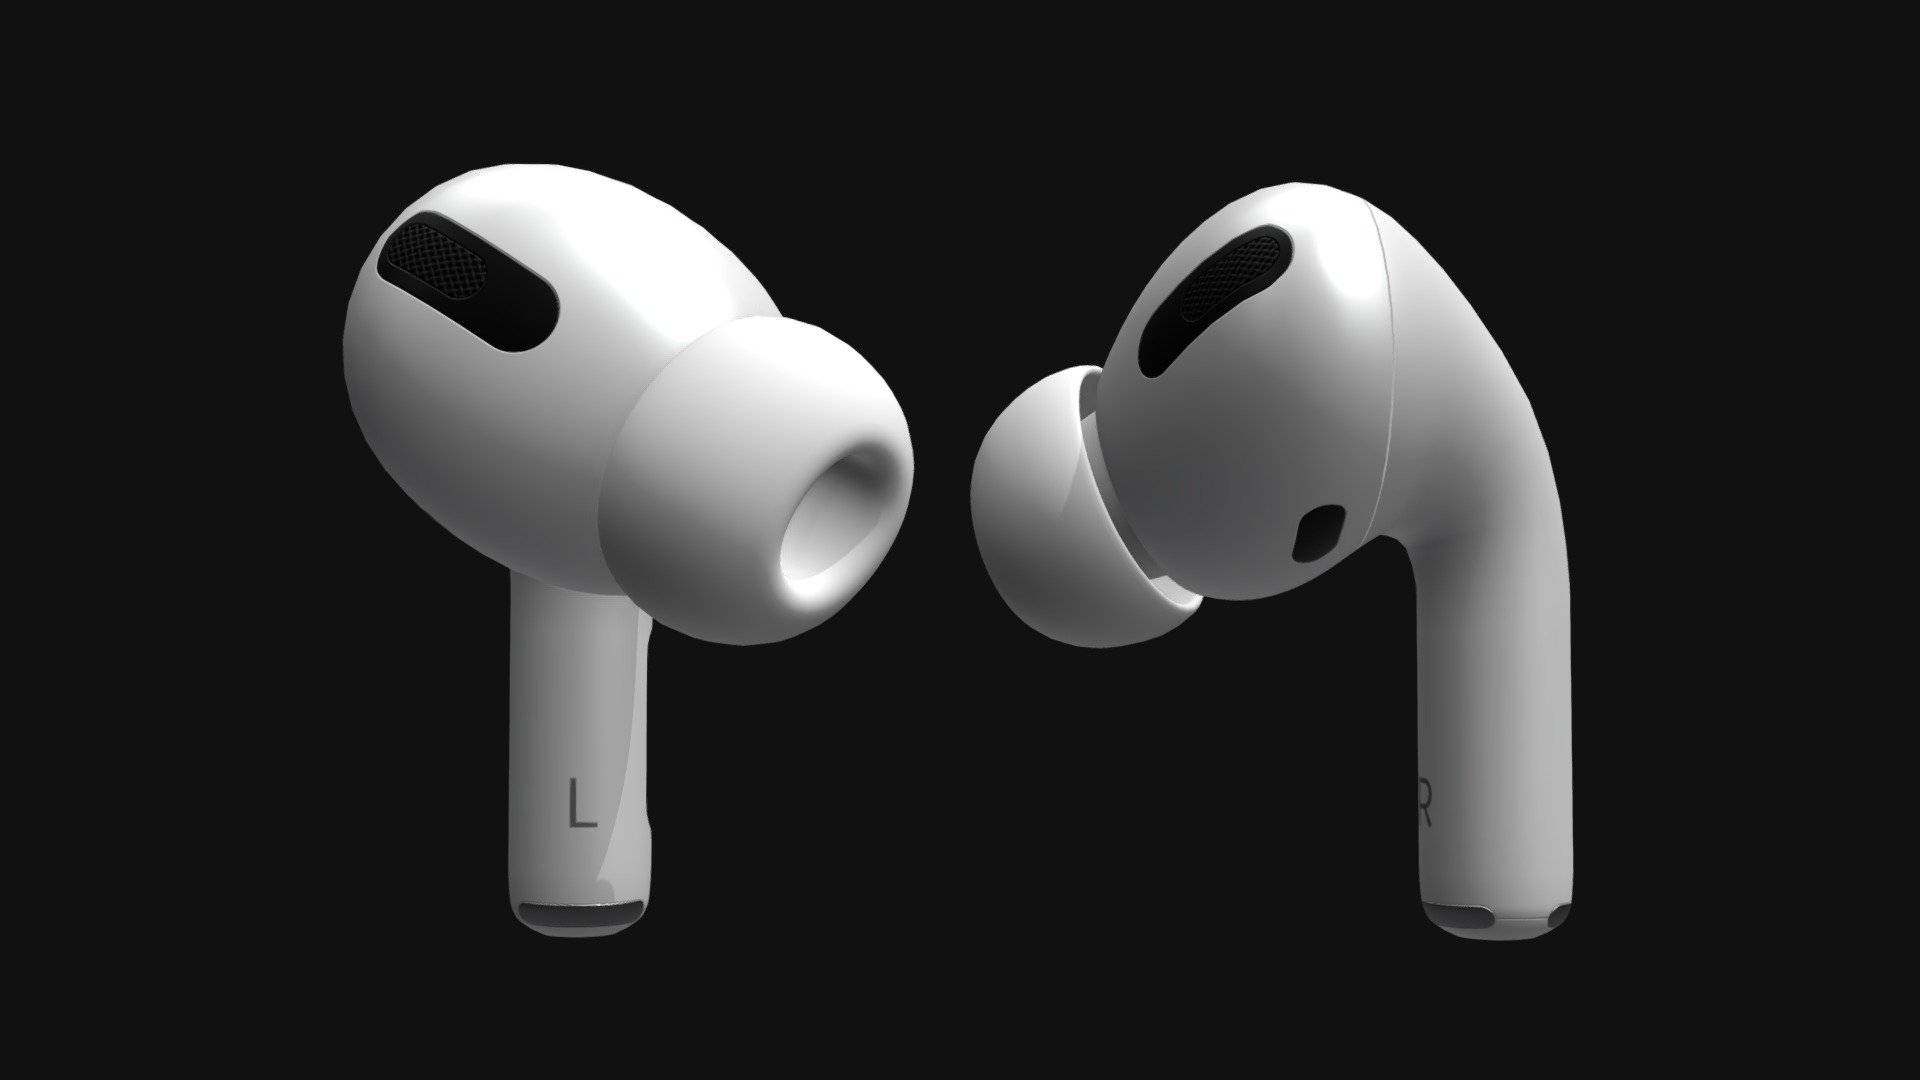 Apple AirPods Pro Low Poly 3D Model with Vector Textures. Original source file: Cinema 4D (.c4d). Additional file contains: .3ds, .obj and high resolution textures 3d model